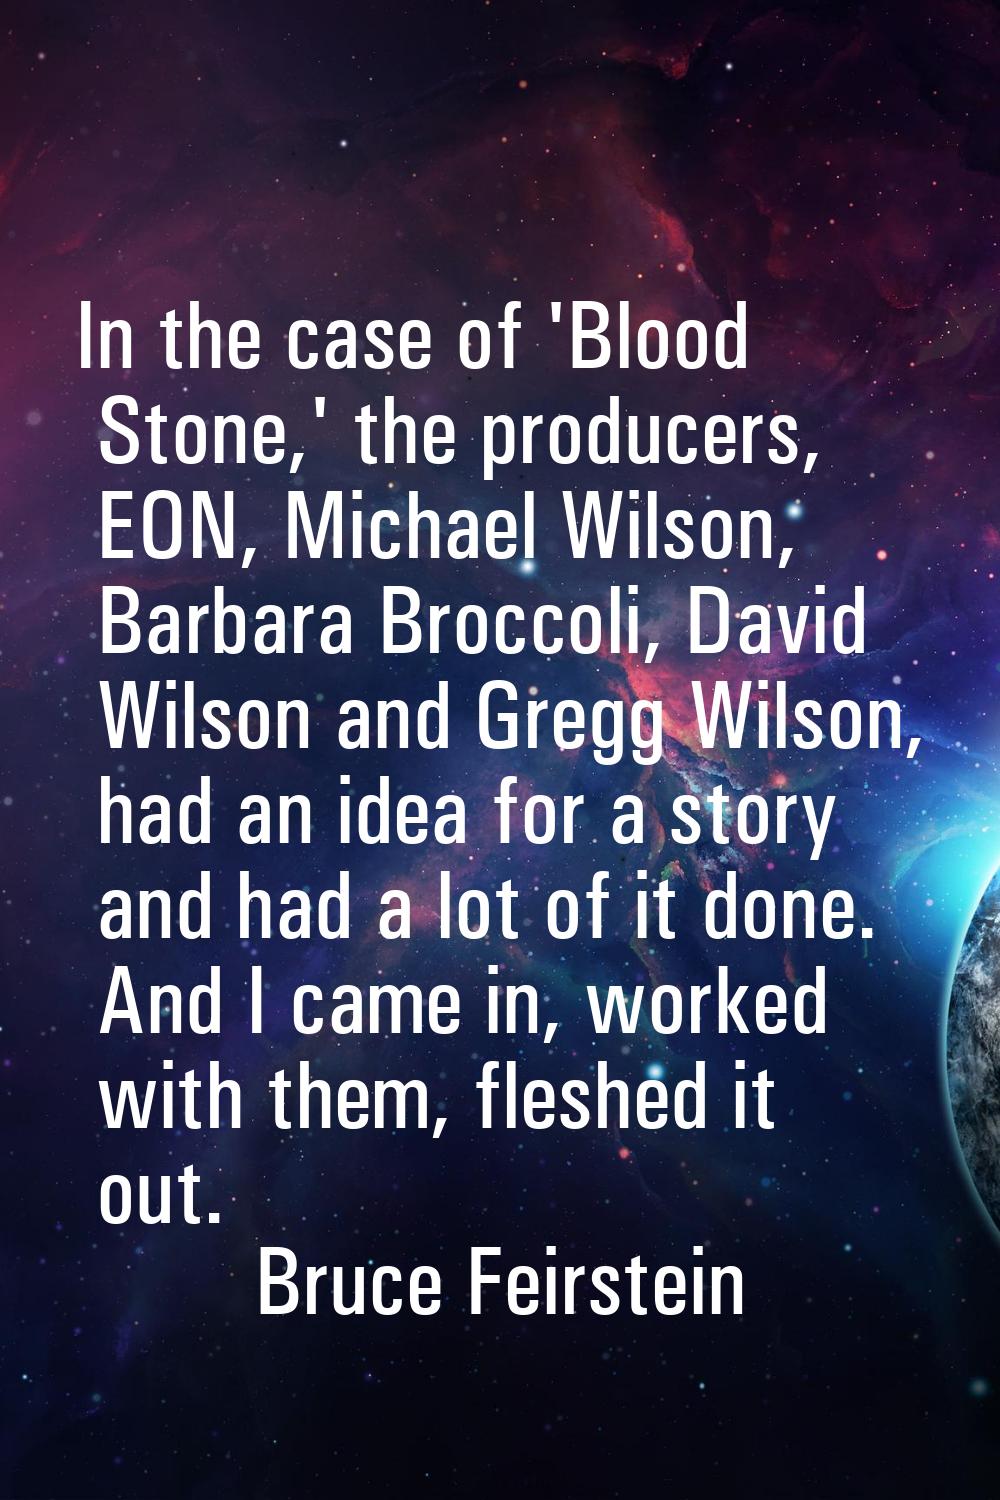 In the case of 'Blood Stone,' the producers, EON, Michael Wilson, Barbara Broccoli, David Wilson an